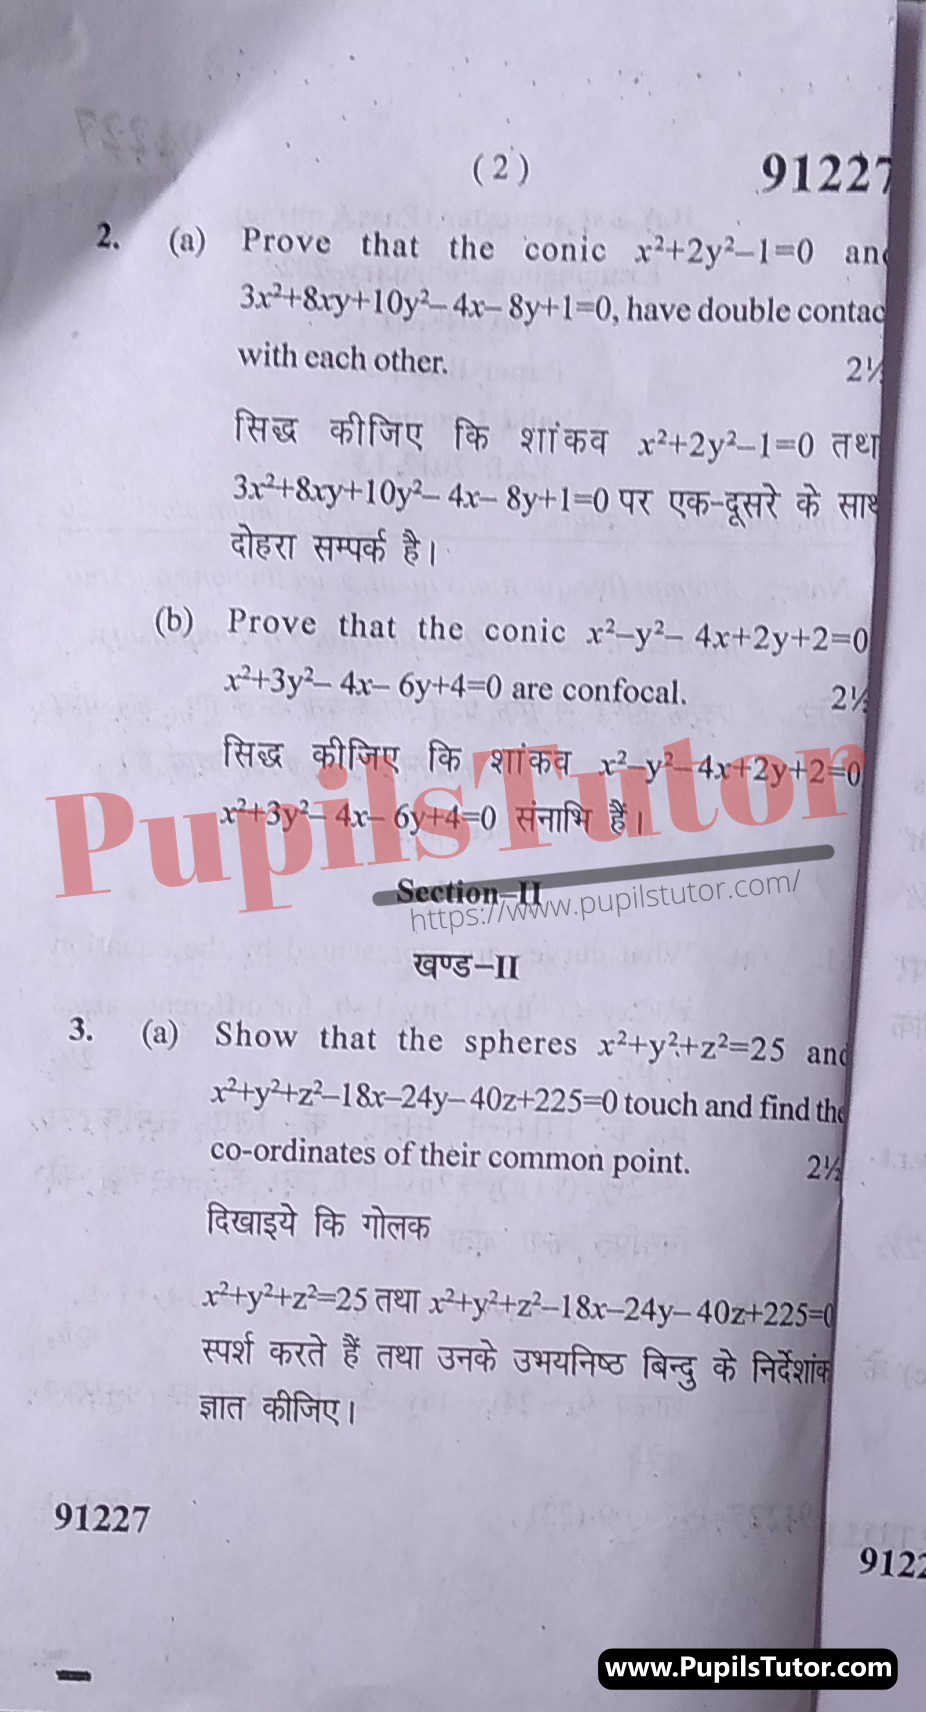 M.D. University B.A. Solid Geometry First Semester Important Question Answer And Solution - www.pupilstutor.com (Paper Page Number 2)